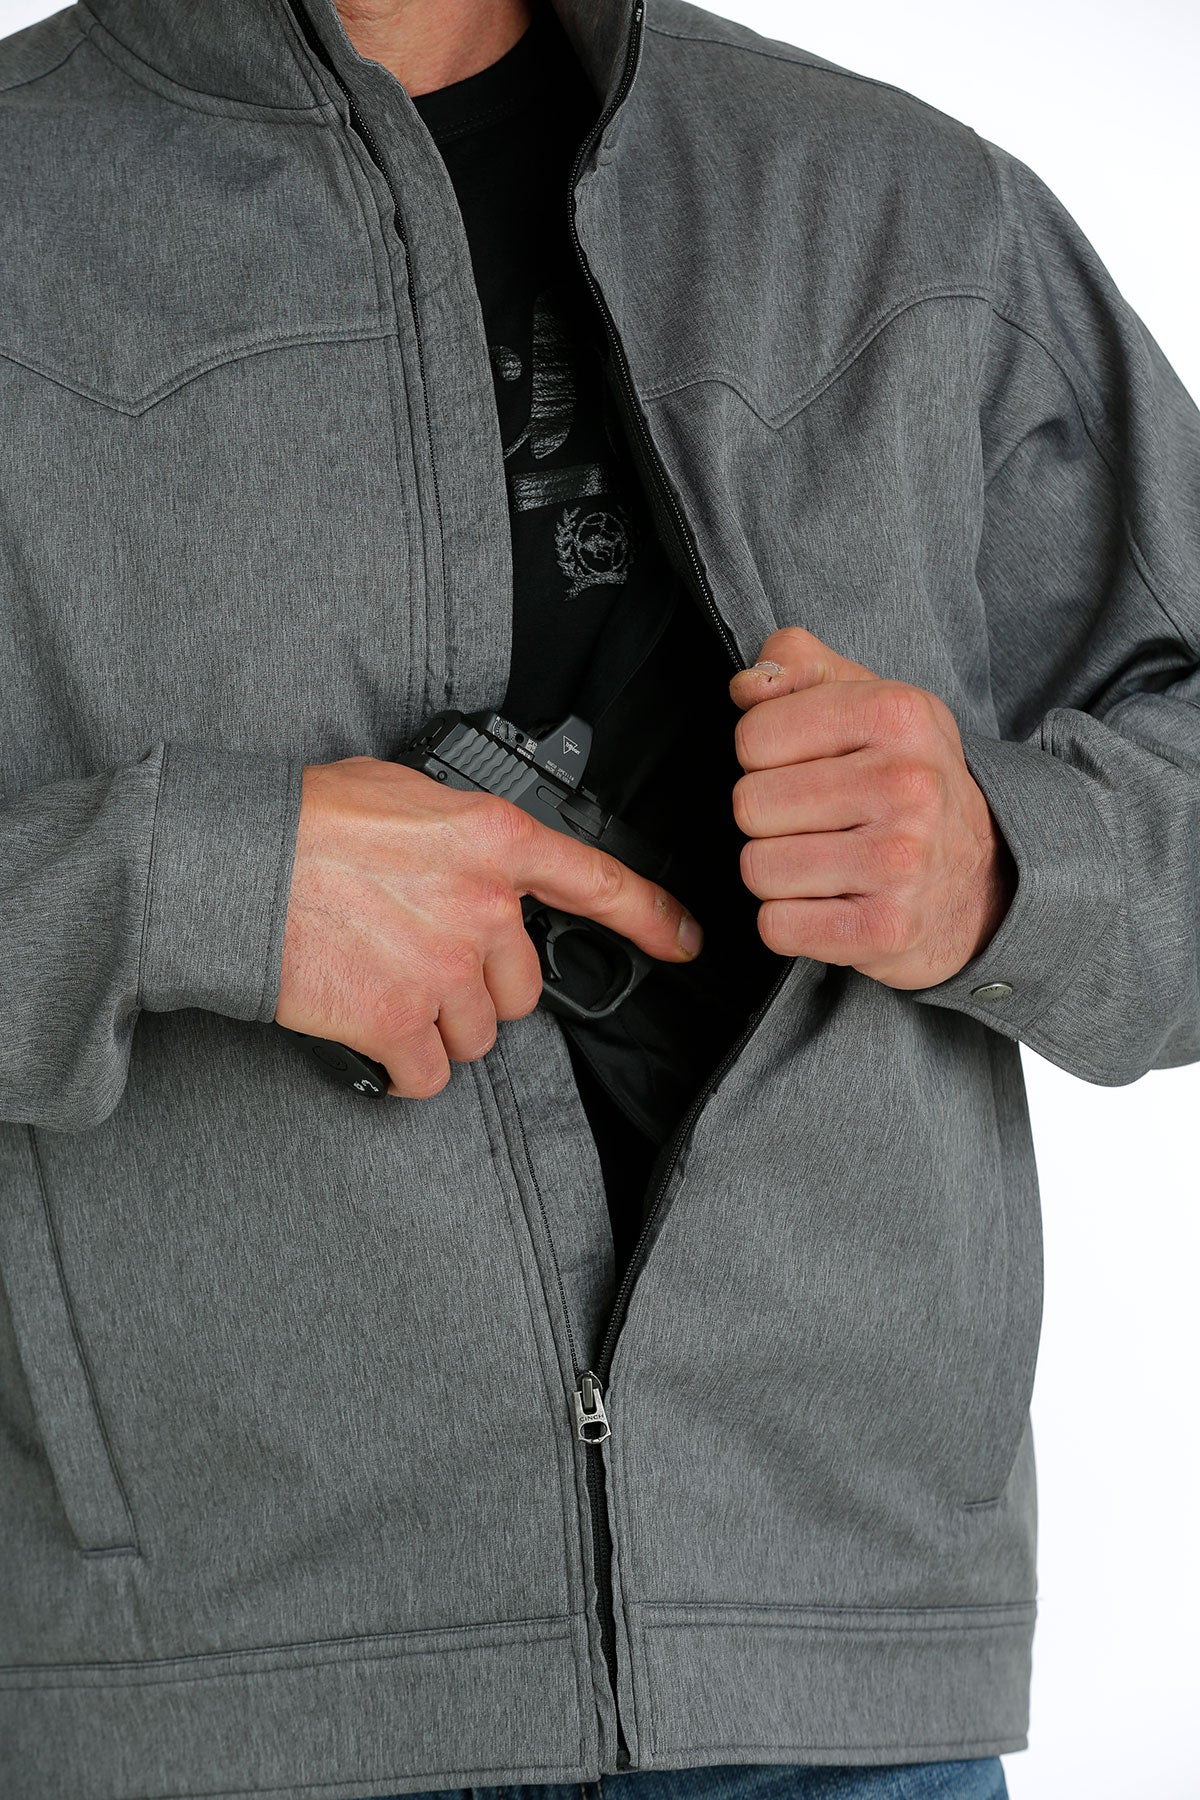 Gray Bonded Carry Conceal Jacket